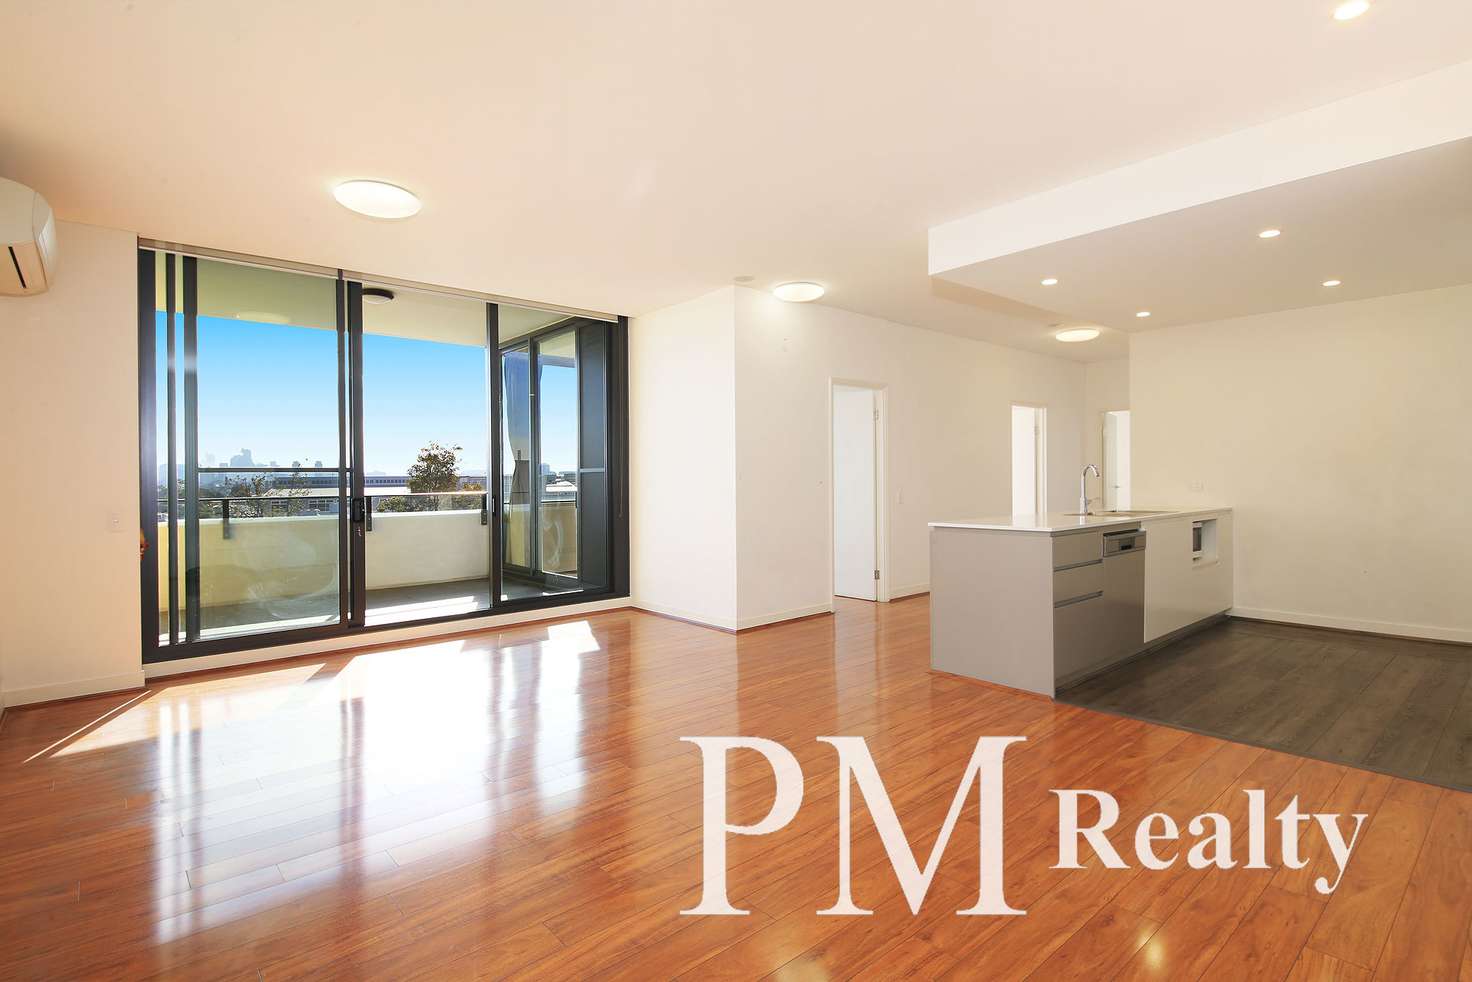 Main view of Homely apartment listing, 59/629 Gardeners Rd, Mascot NSW 2020